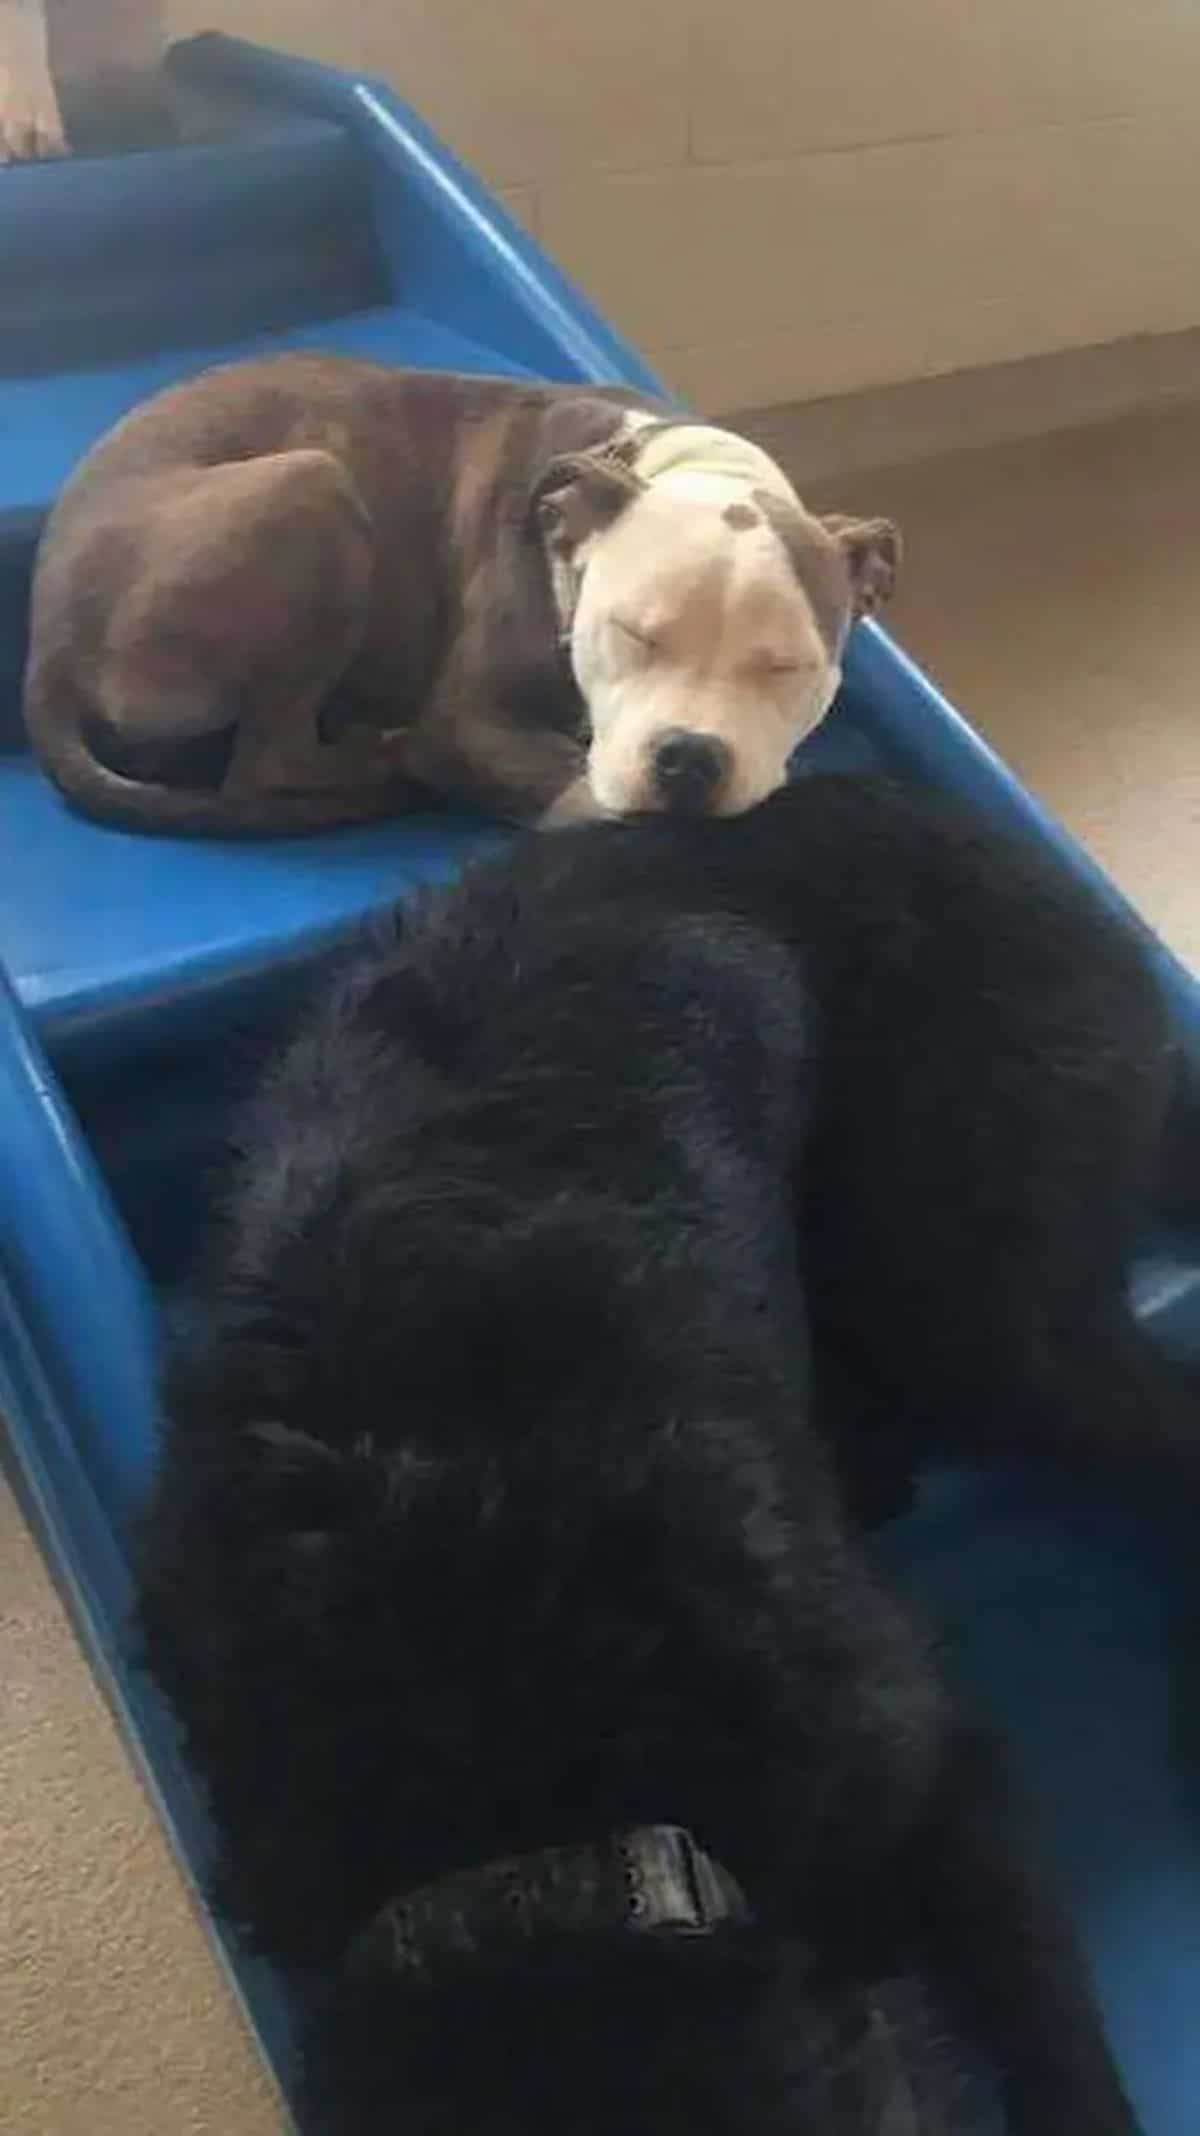 brown and white pitbull puppy sleeping on a blue step above a black dog with the nsoe pressing against the black dog's back